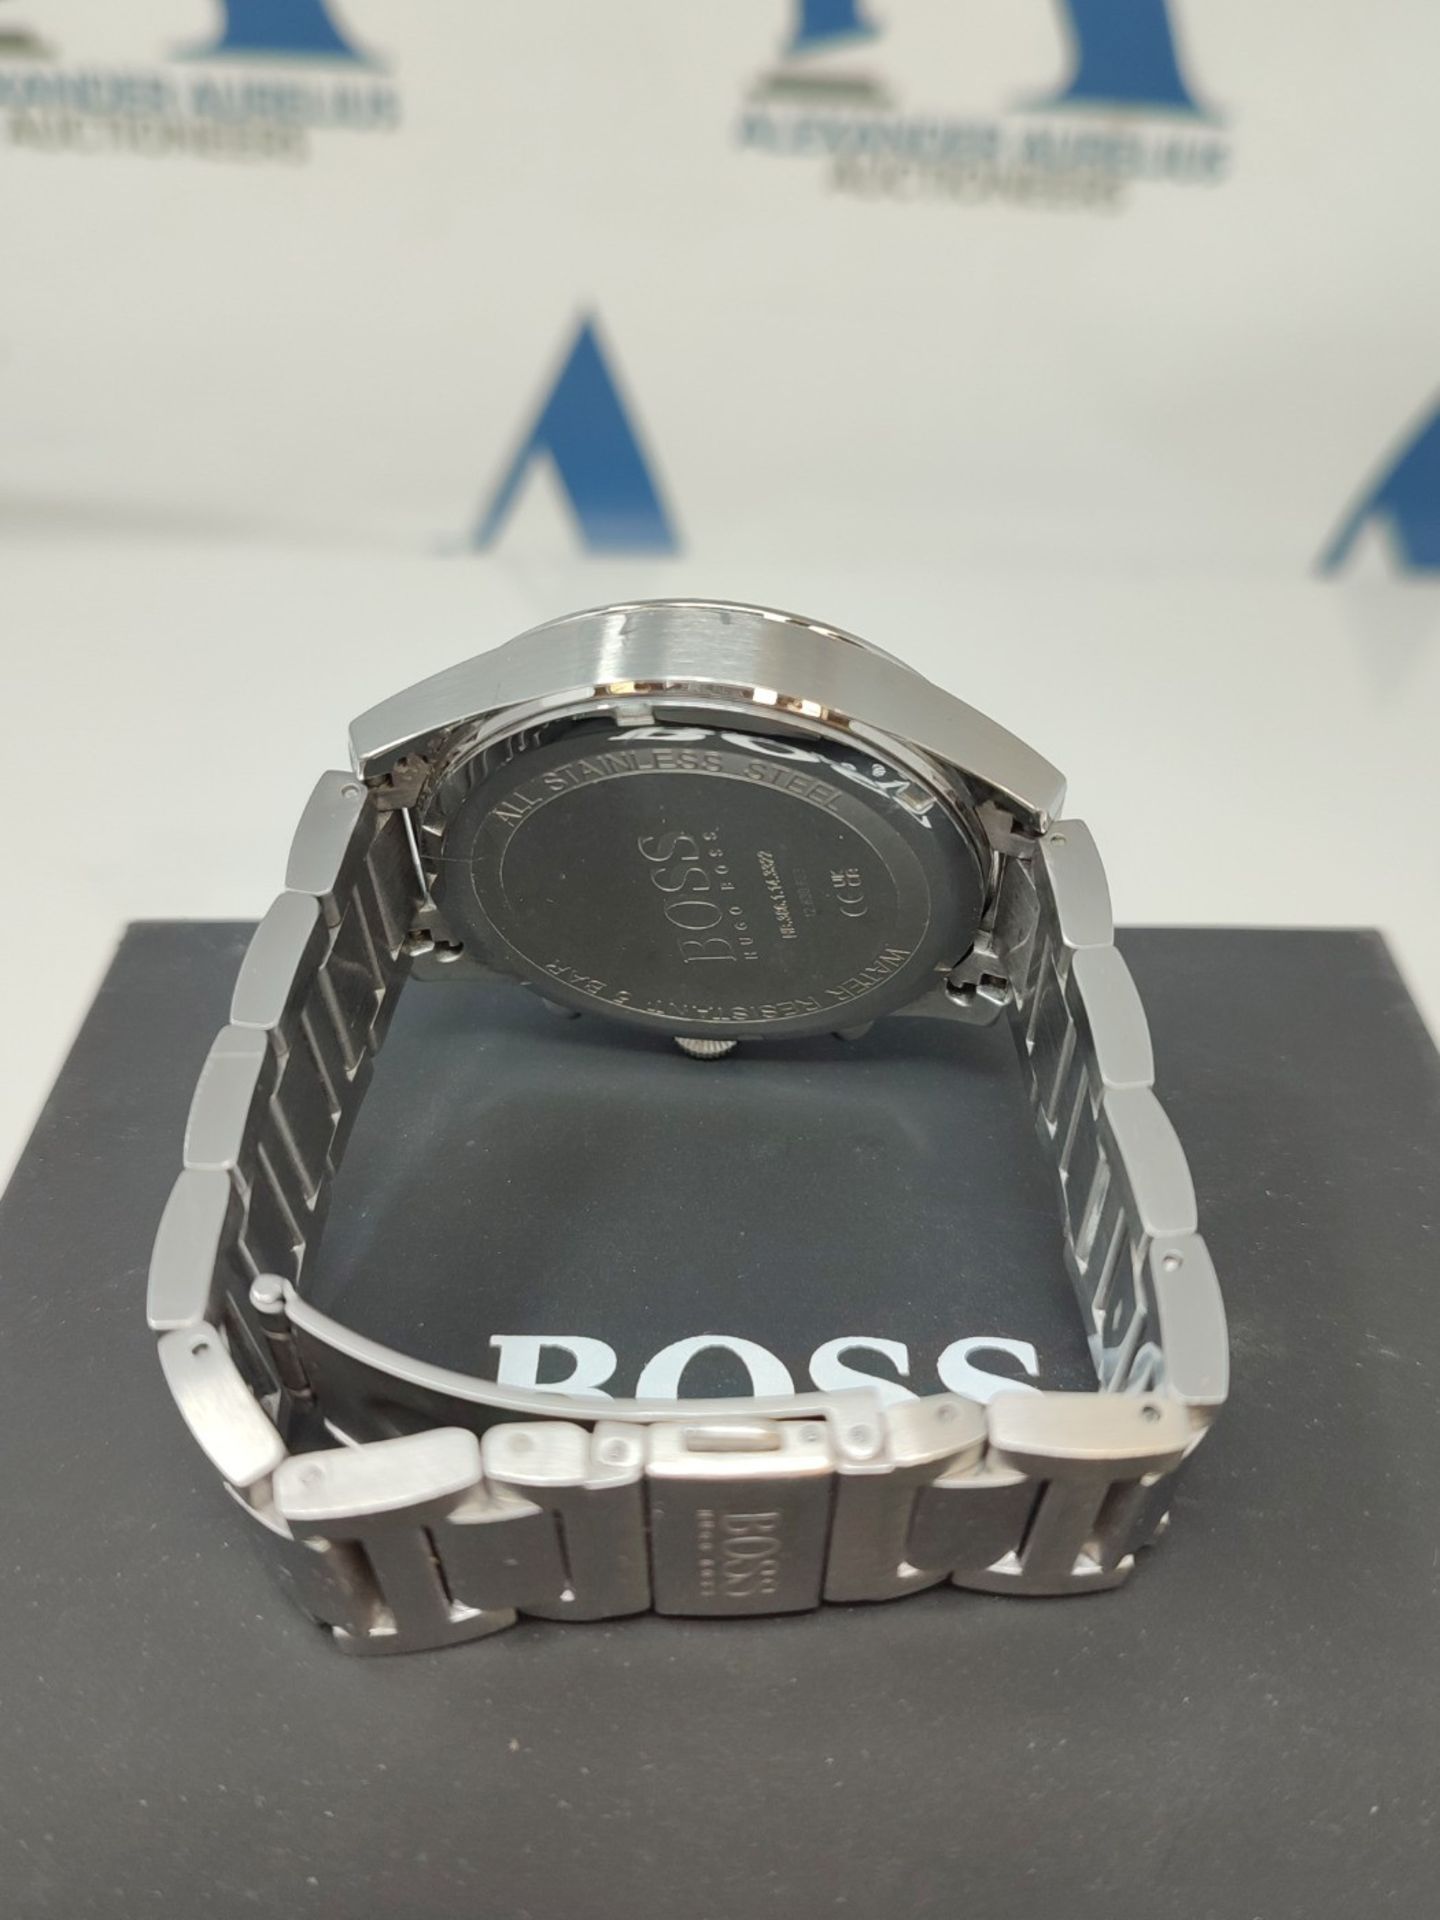 RRP £249.00 BOSS Chronograph Quartz Watch for Men with Silver Stainless Steel Bracelet - 1513712 - Image 3 of 3